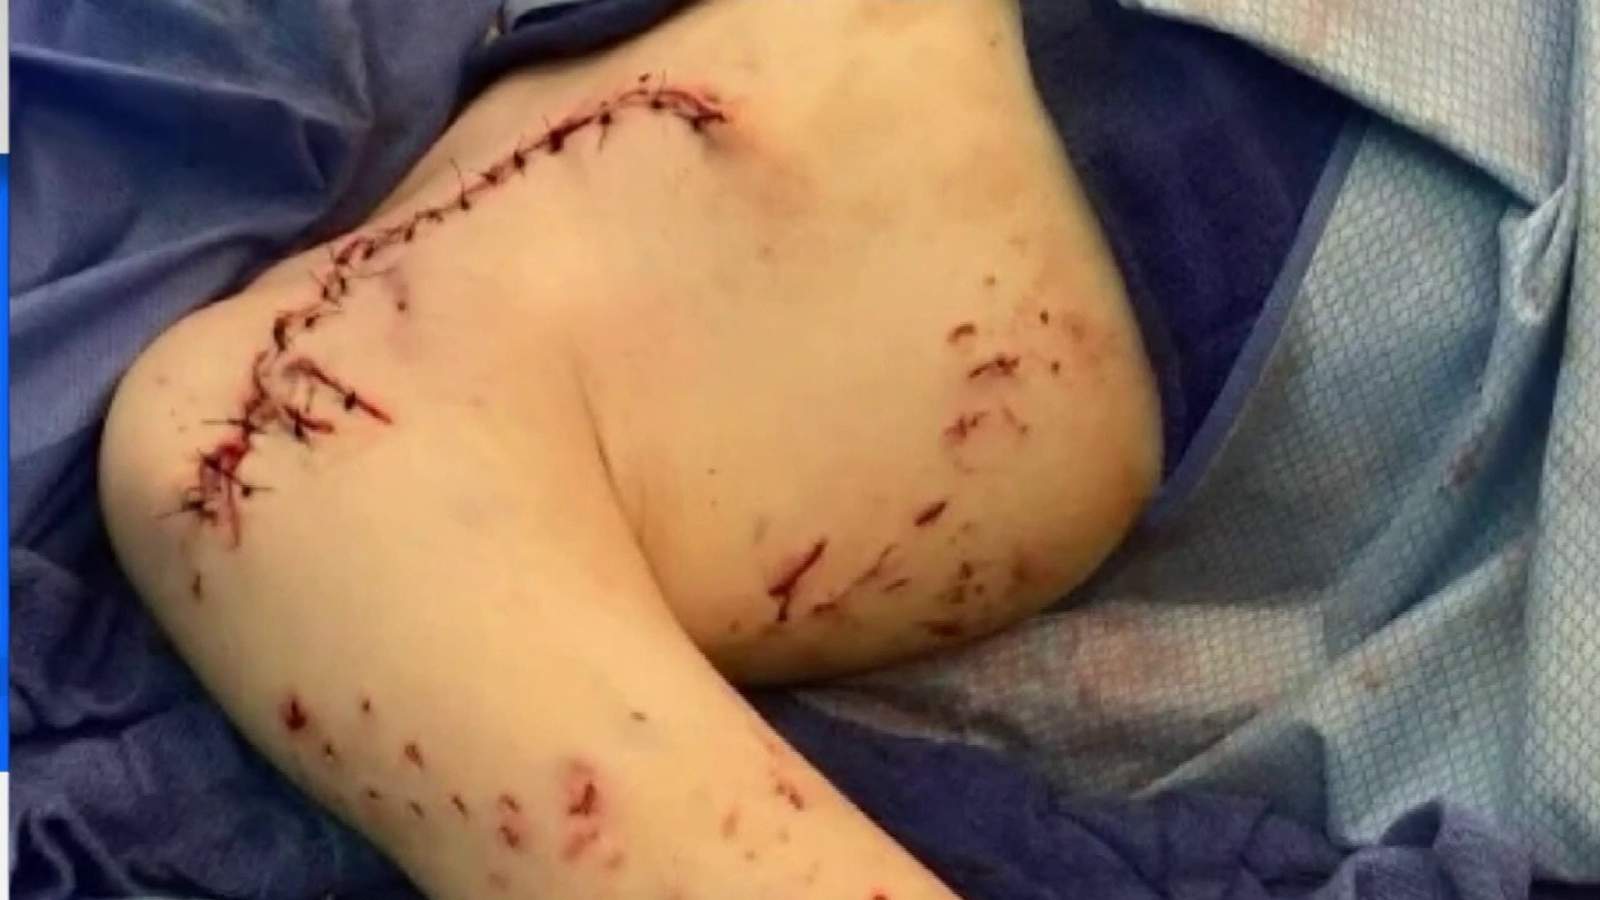 9-year-old boy recovering after bite at Florida beach